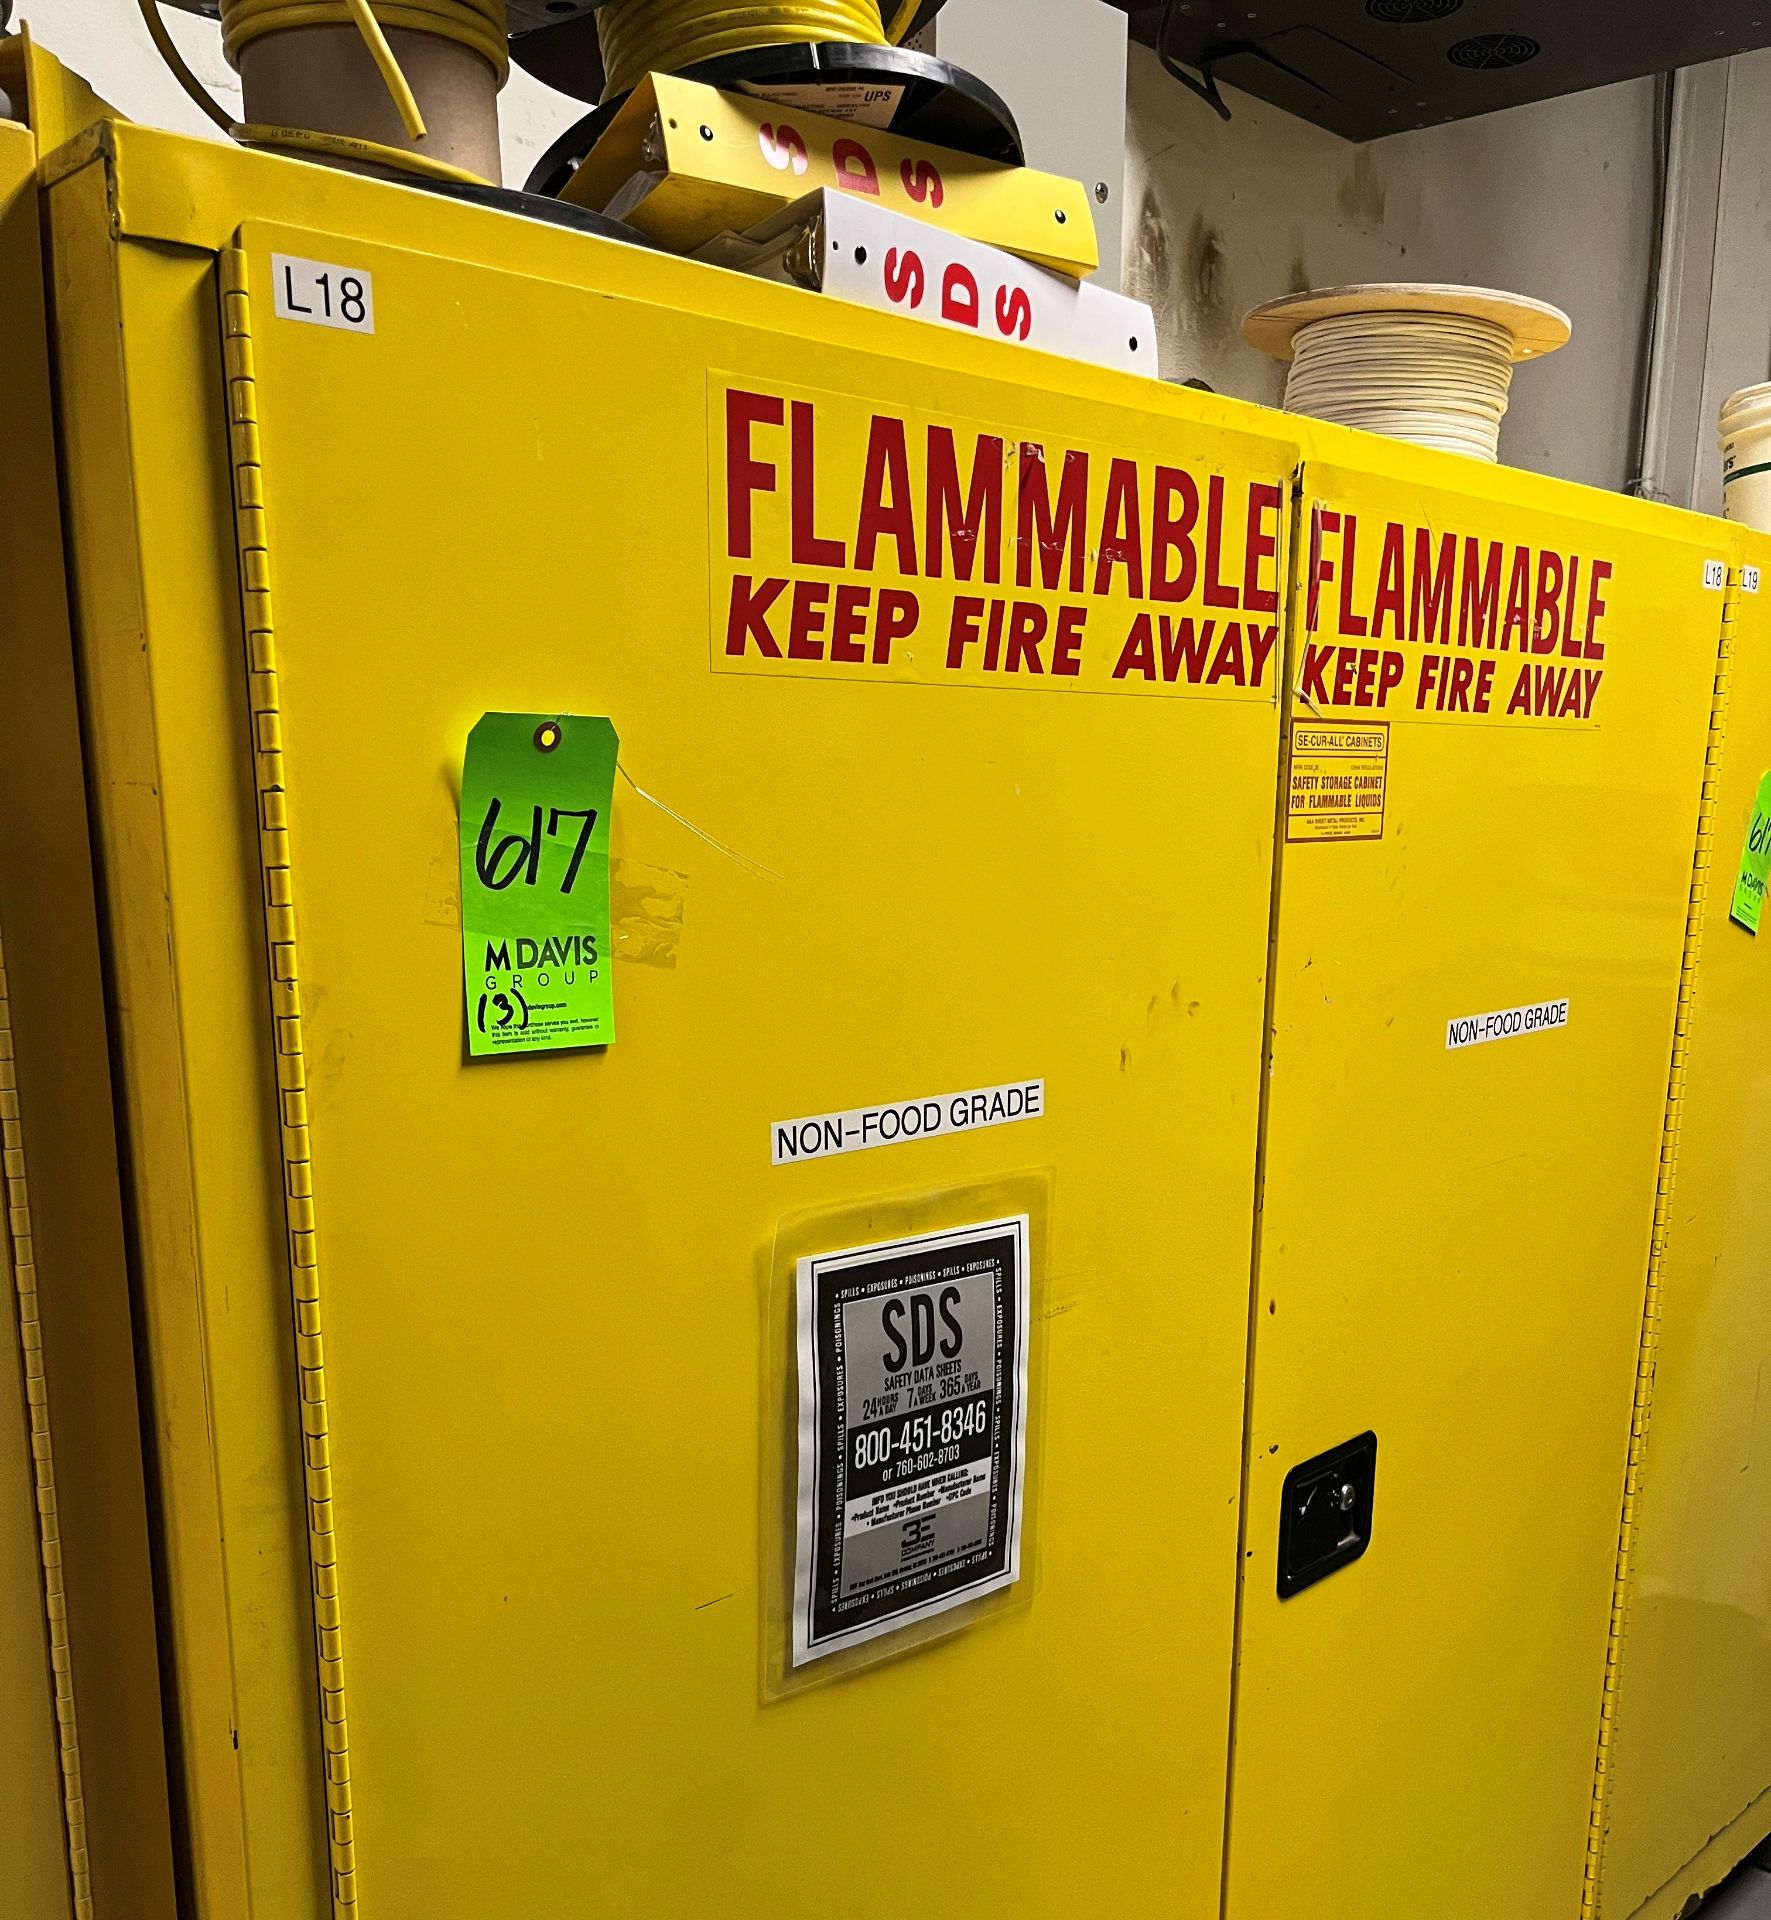 ULINE FLAMMABLE STORAGE CABINETS(3) - Image 2 of 3